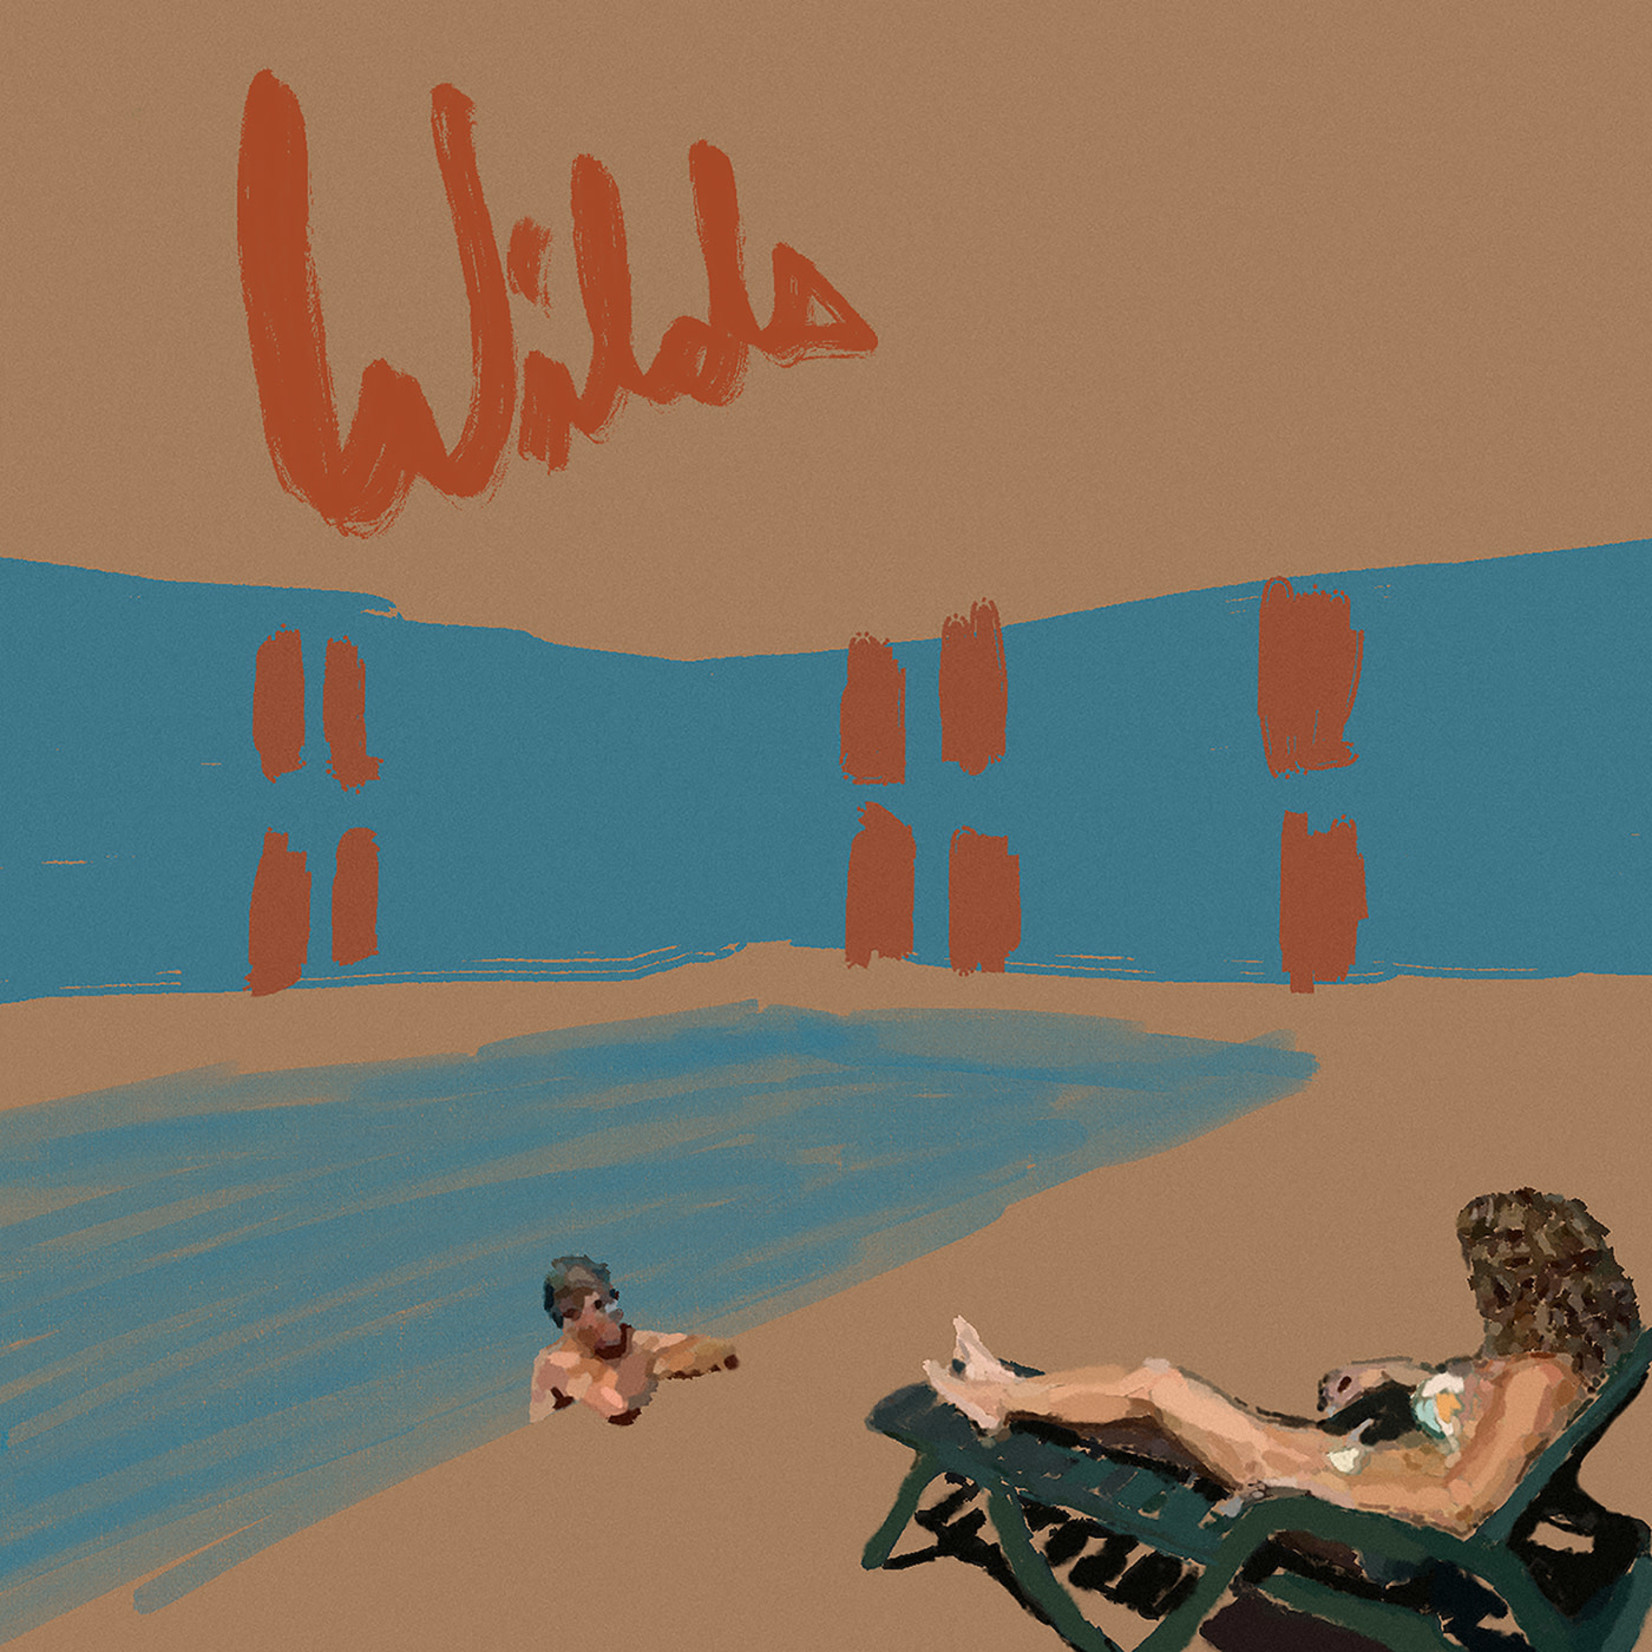 [New] Shauf, Andy: Wilds [ARTS & CRAFTS]